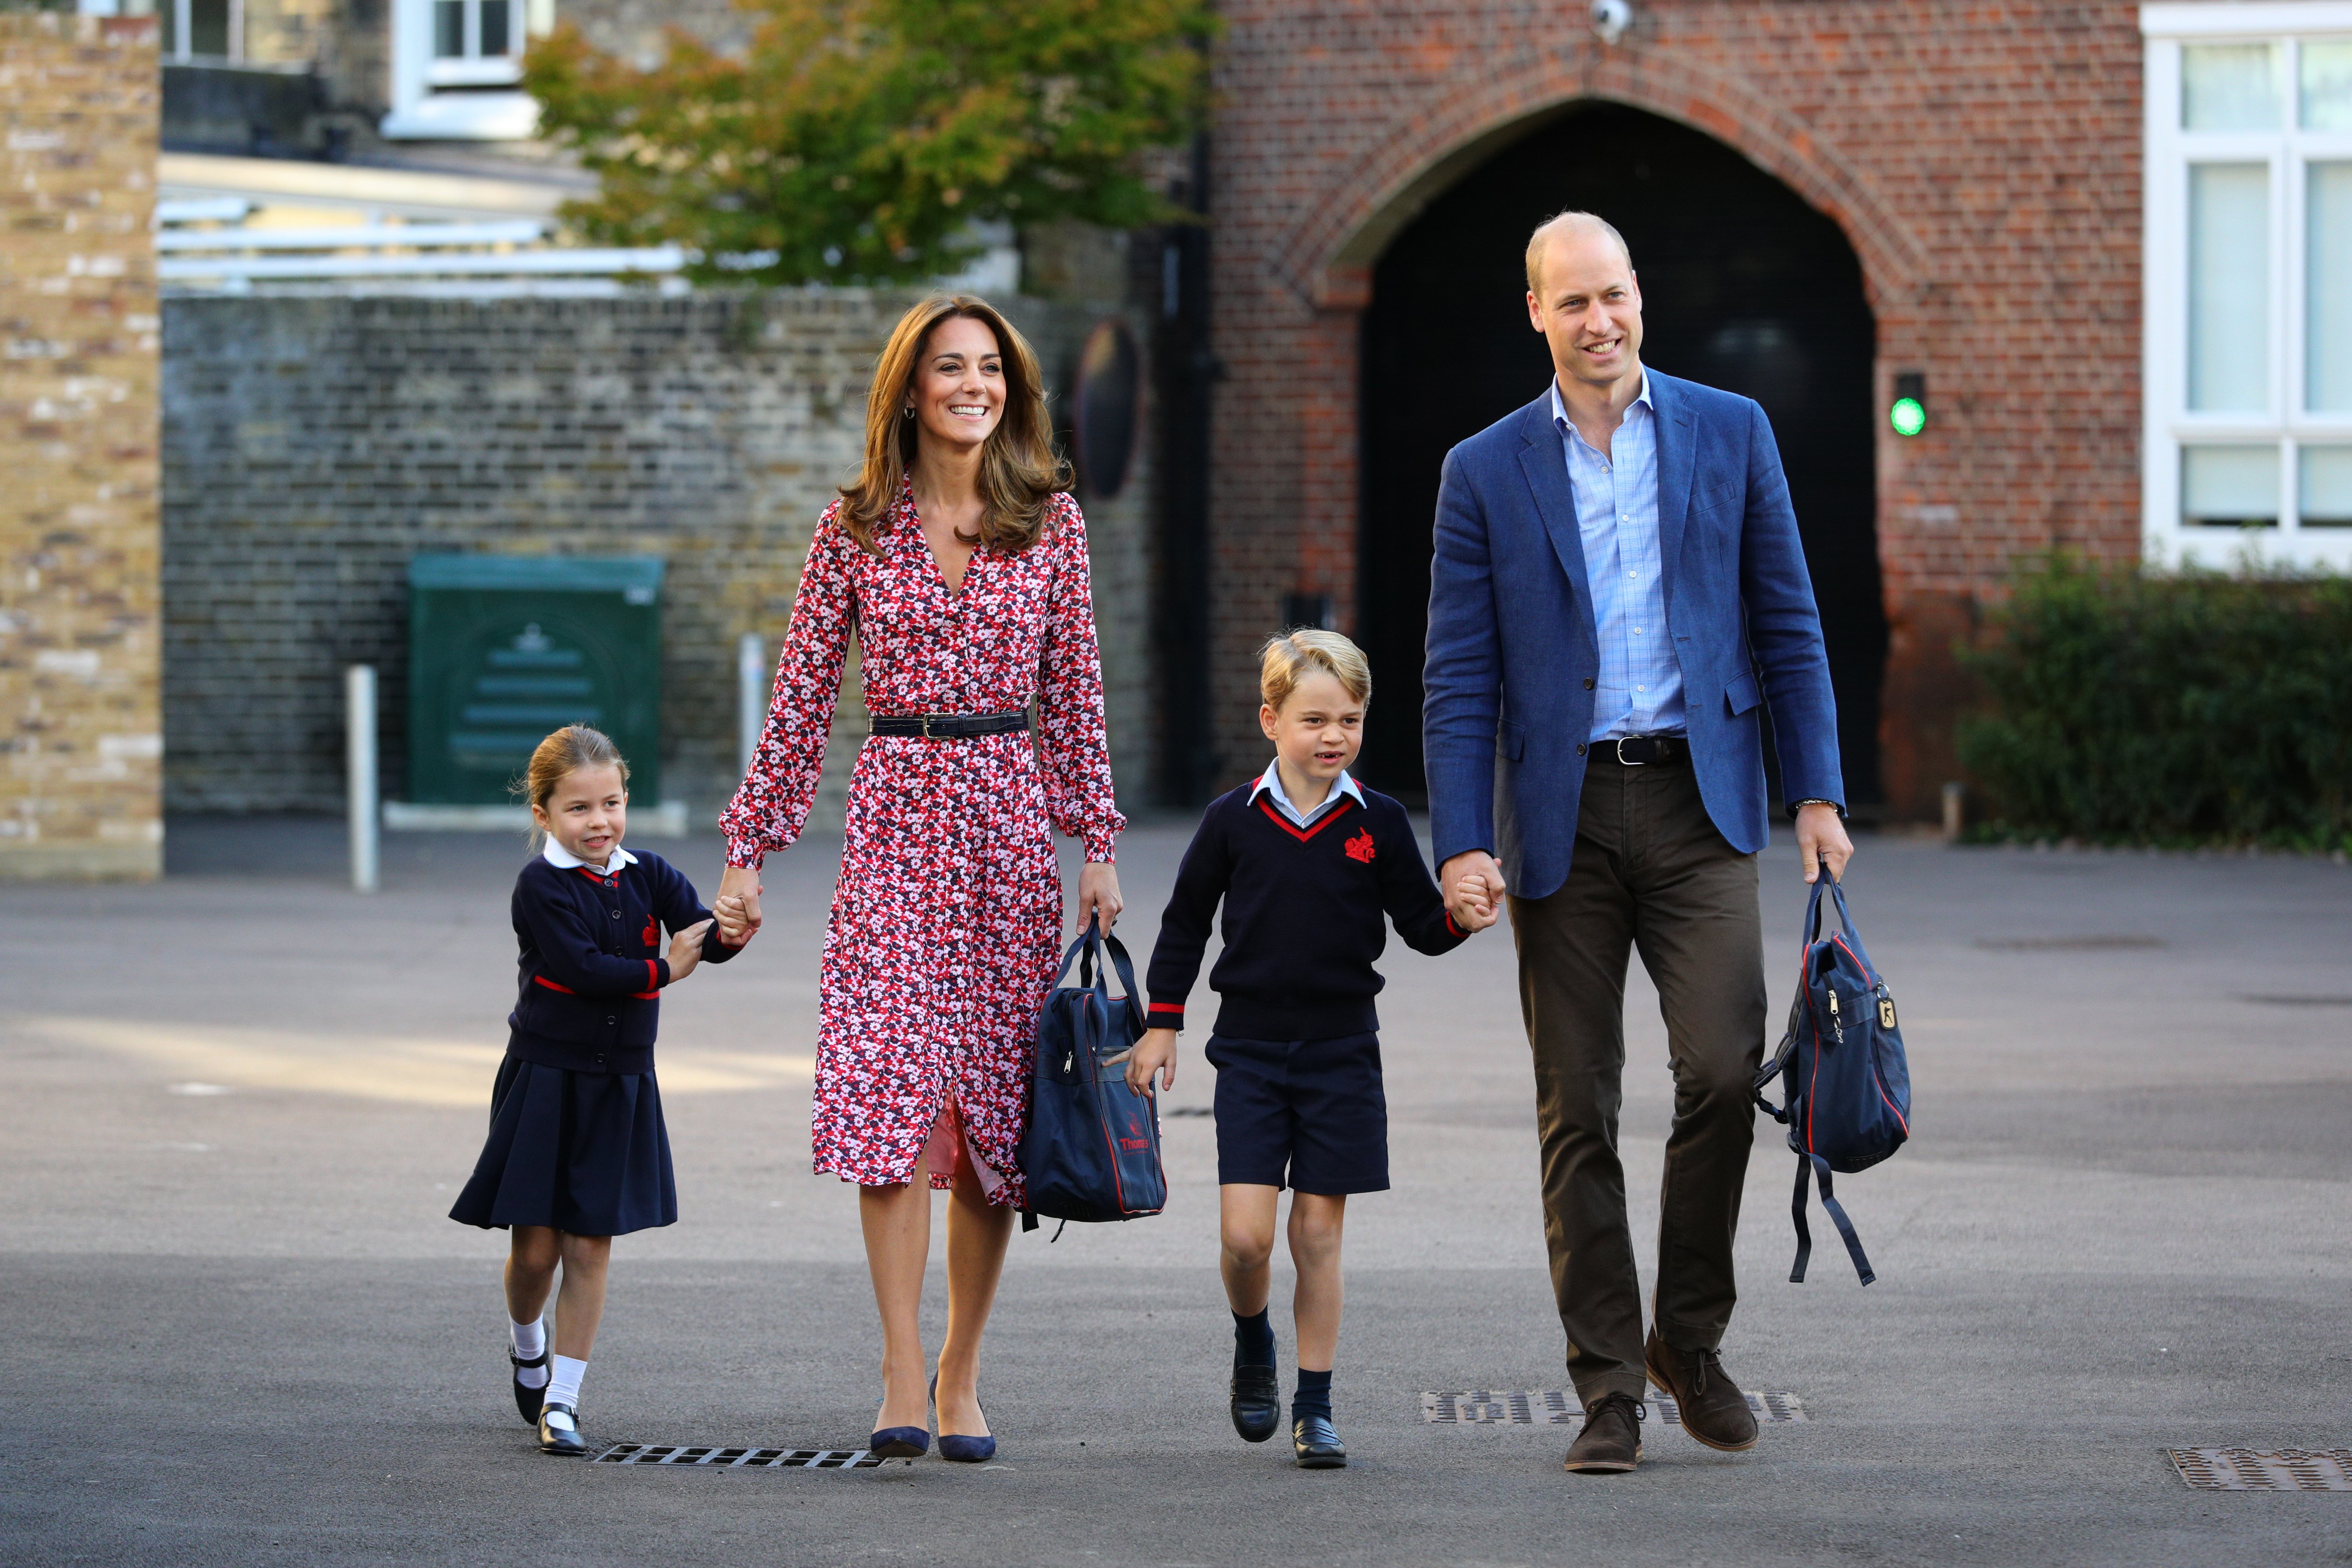 Prince William, Kate Middleton and their children Prince George and Princess Charlotte on September 5 2019 in London England | Source: Getty Images